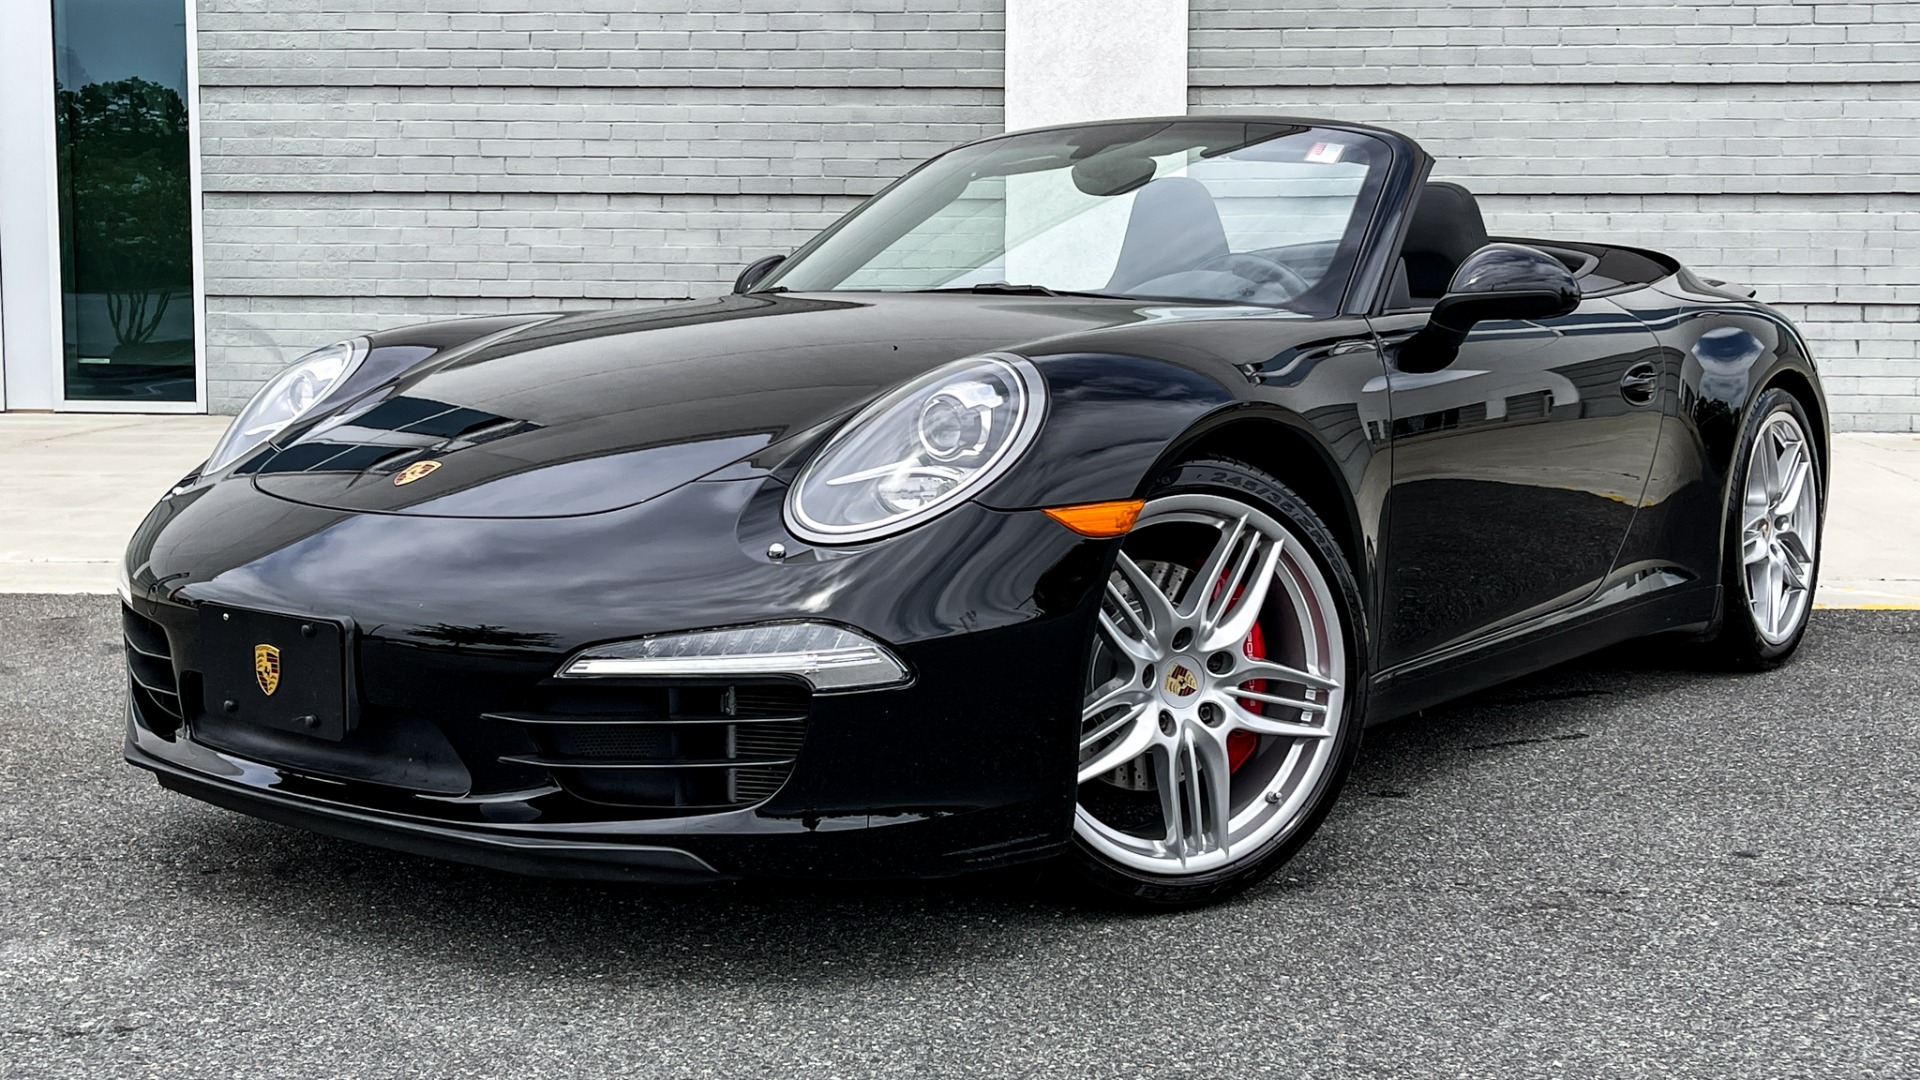 Used 2012 Porsche 911 991 Carrera S / CABRIOLET / PDK TRANSMISSION / SPORT CHRONO / PREMIUM for sale $80,250 at Formula Imports in Charlotte NC 28227 1